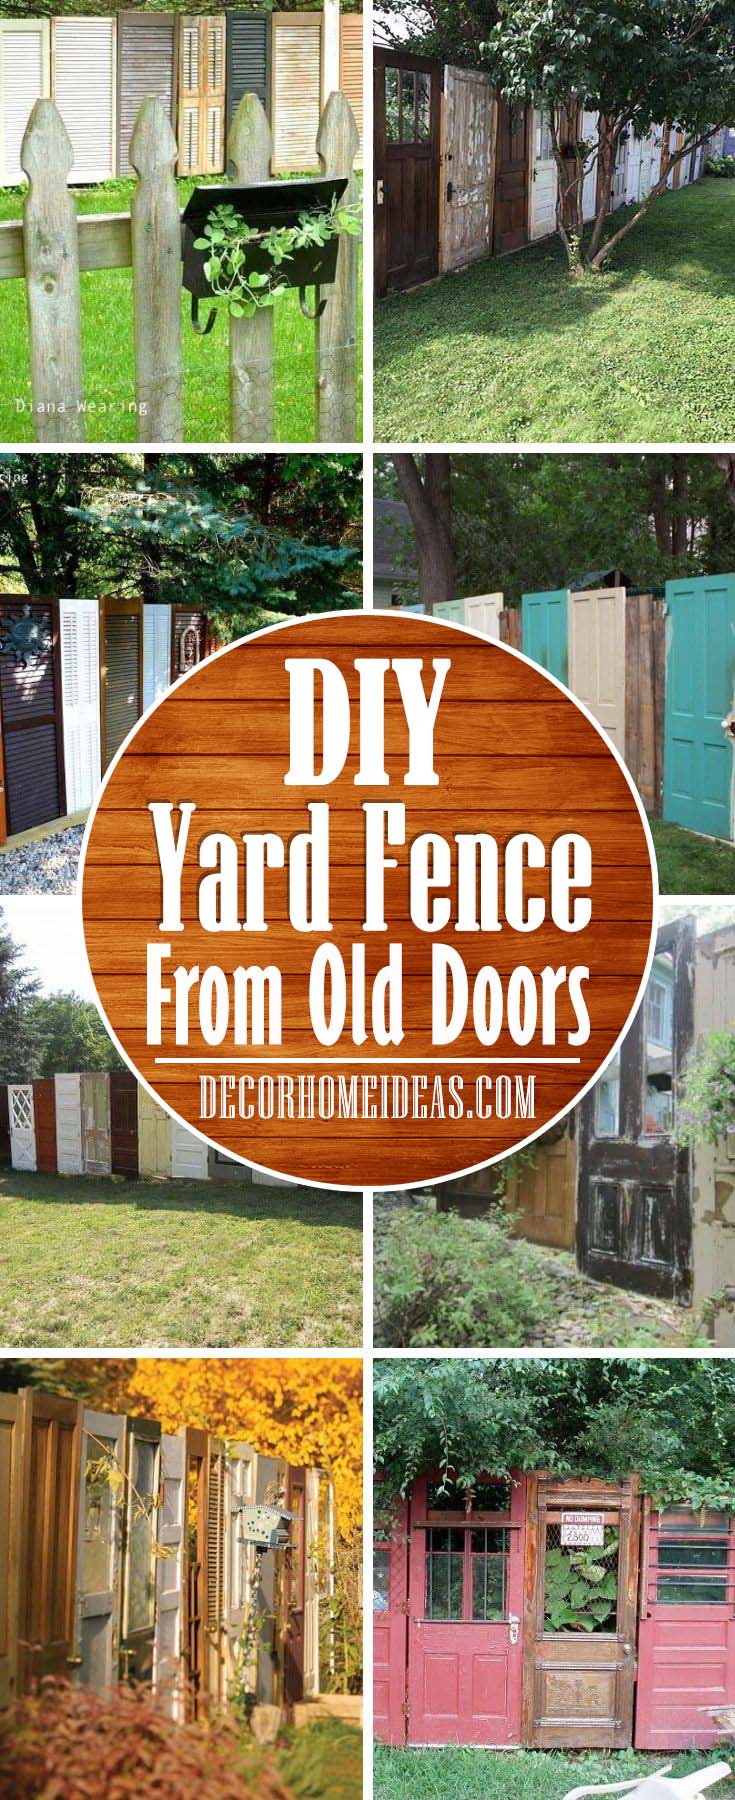 Yard Fence Made Out Of Old Doors. How to repurpose old doors and buıld a stunnıng fence. #dıƴ #repurpose #doors #old #decorhomeideas